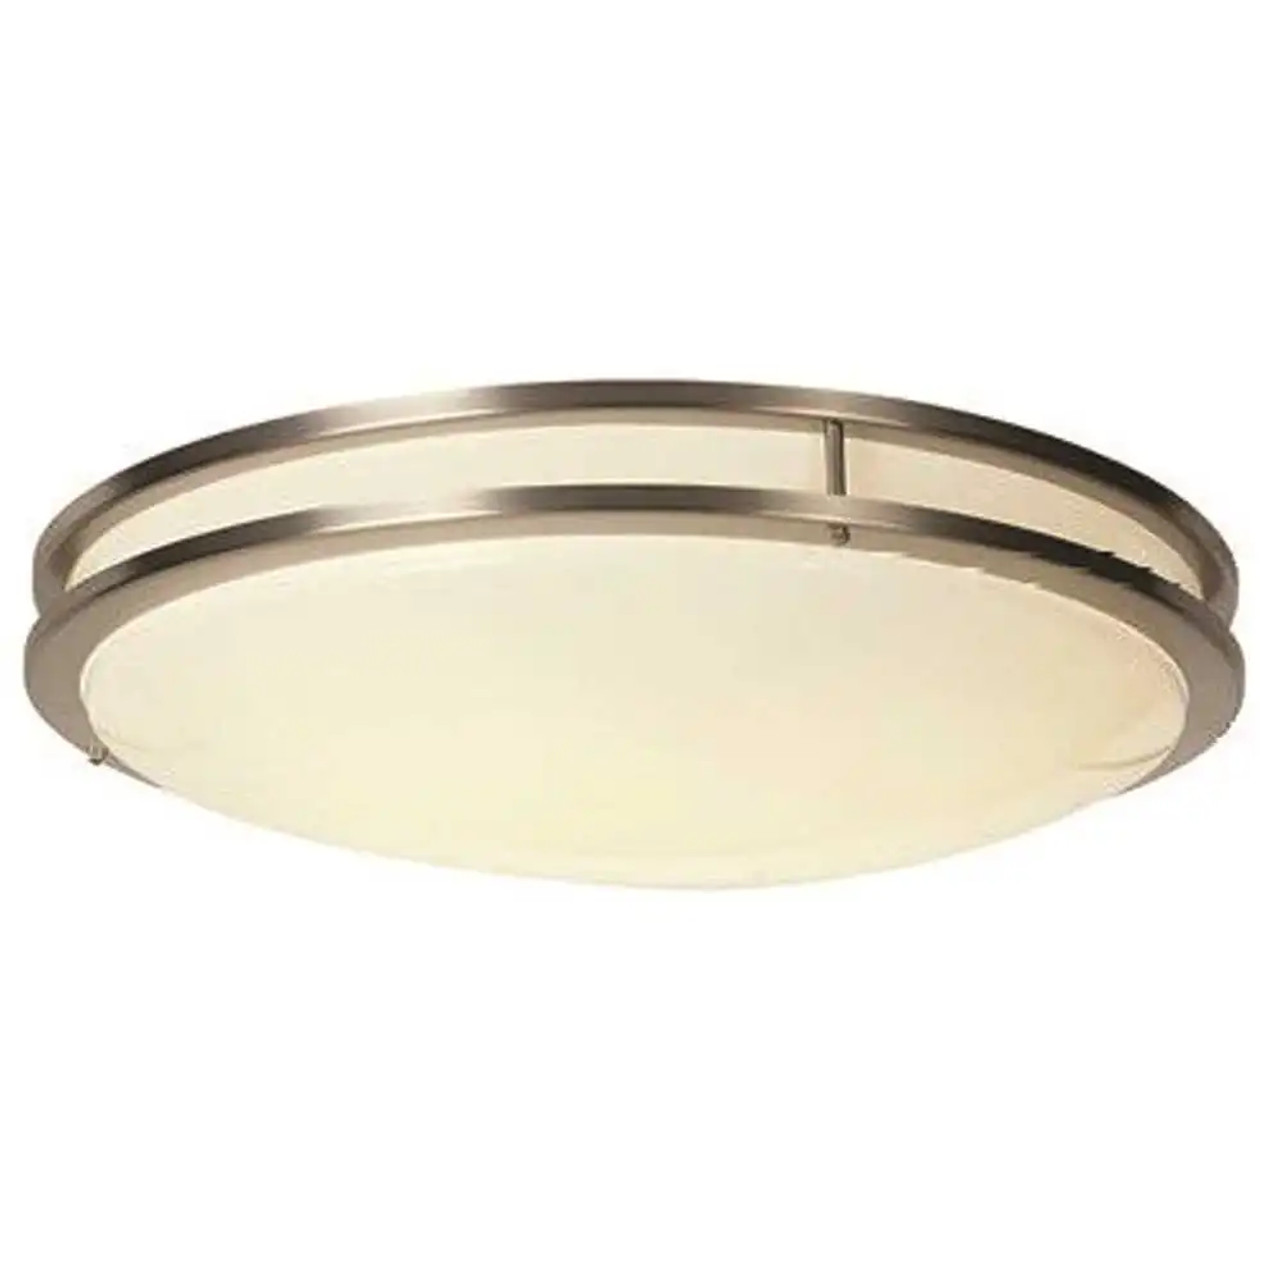 Monument 14.75 in. 2-Light Satin Nickel Flush Mount |By the Pallet- 20 per Pallet|